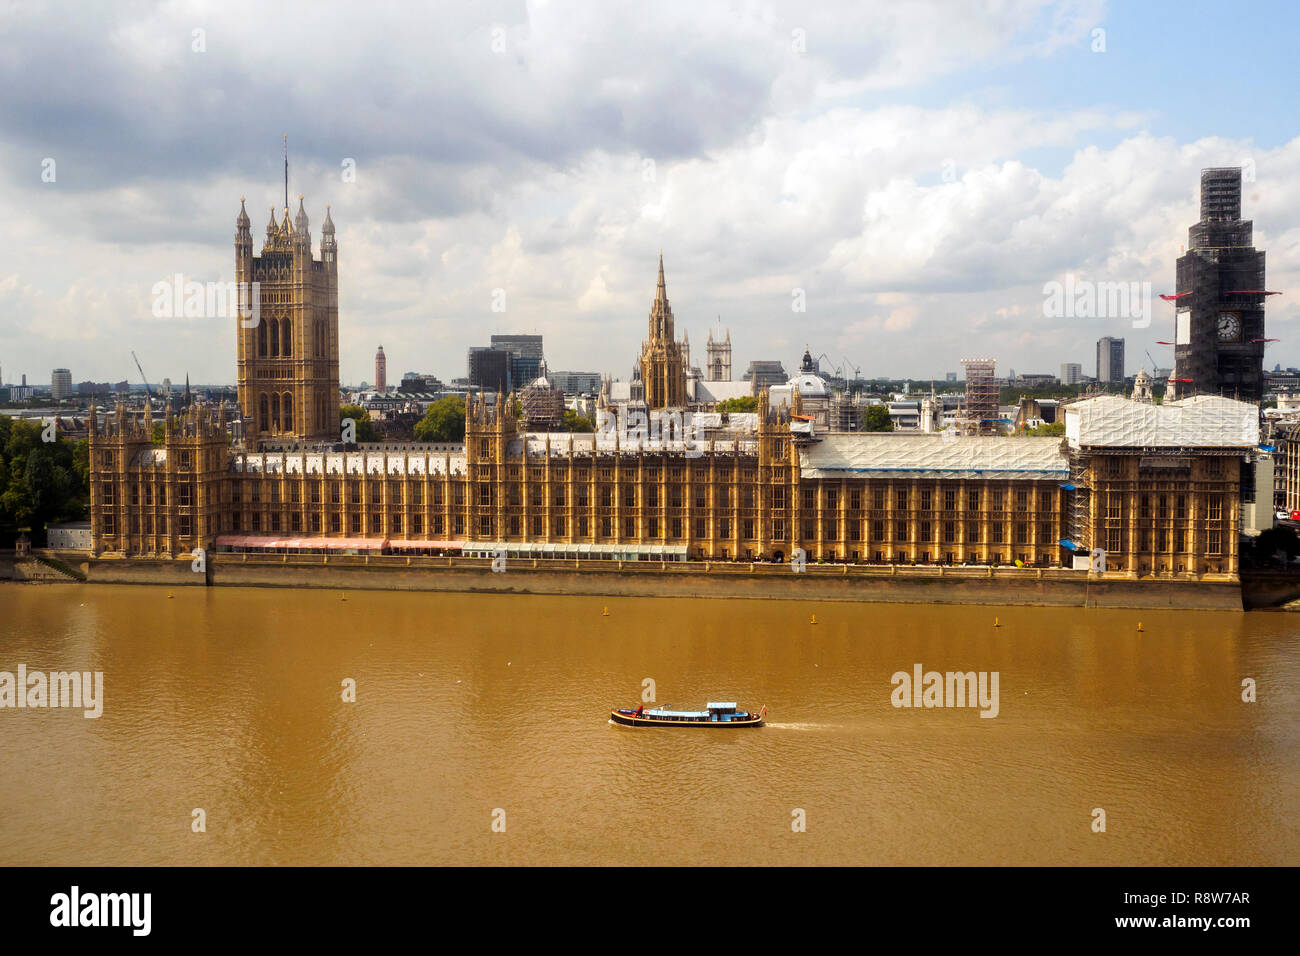 River boat along the Thames in front of Westminster Palace -London, England Stock Photo